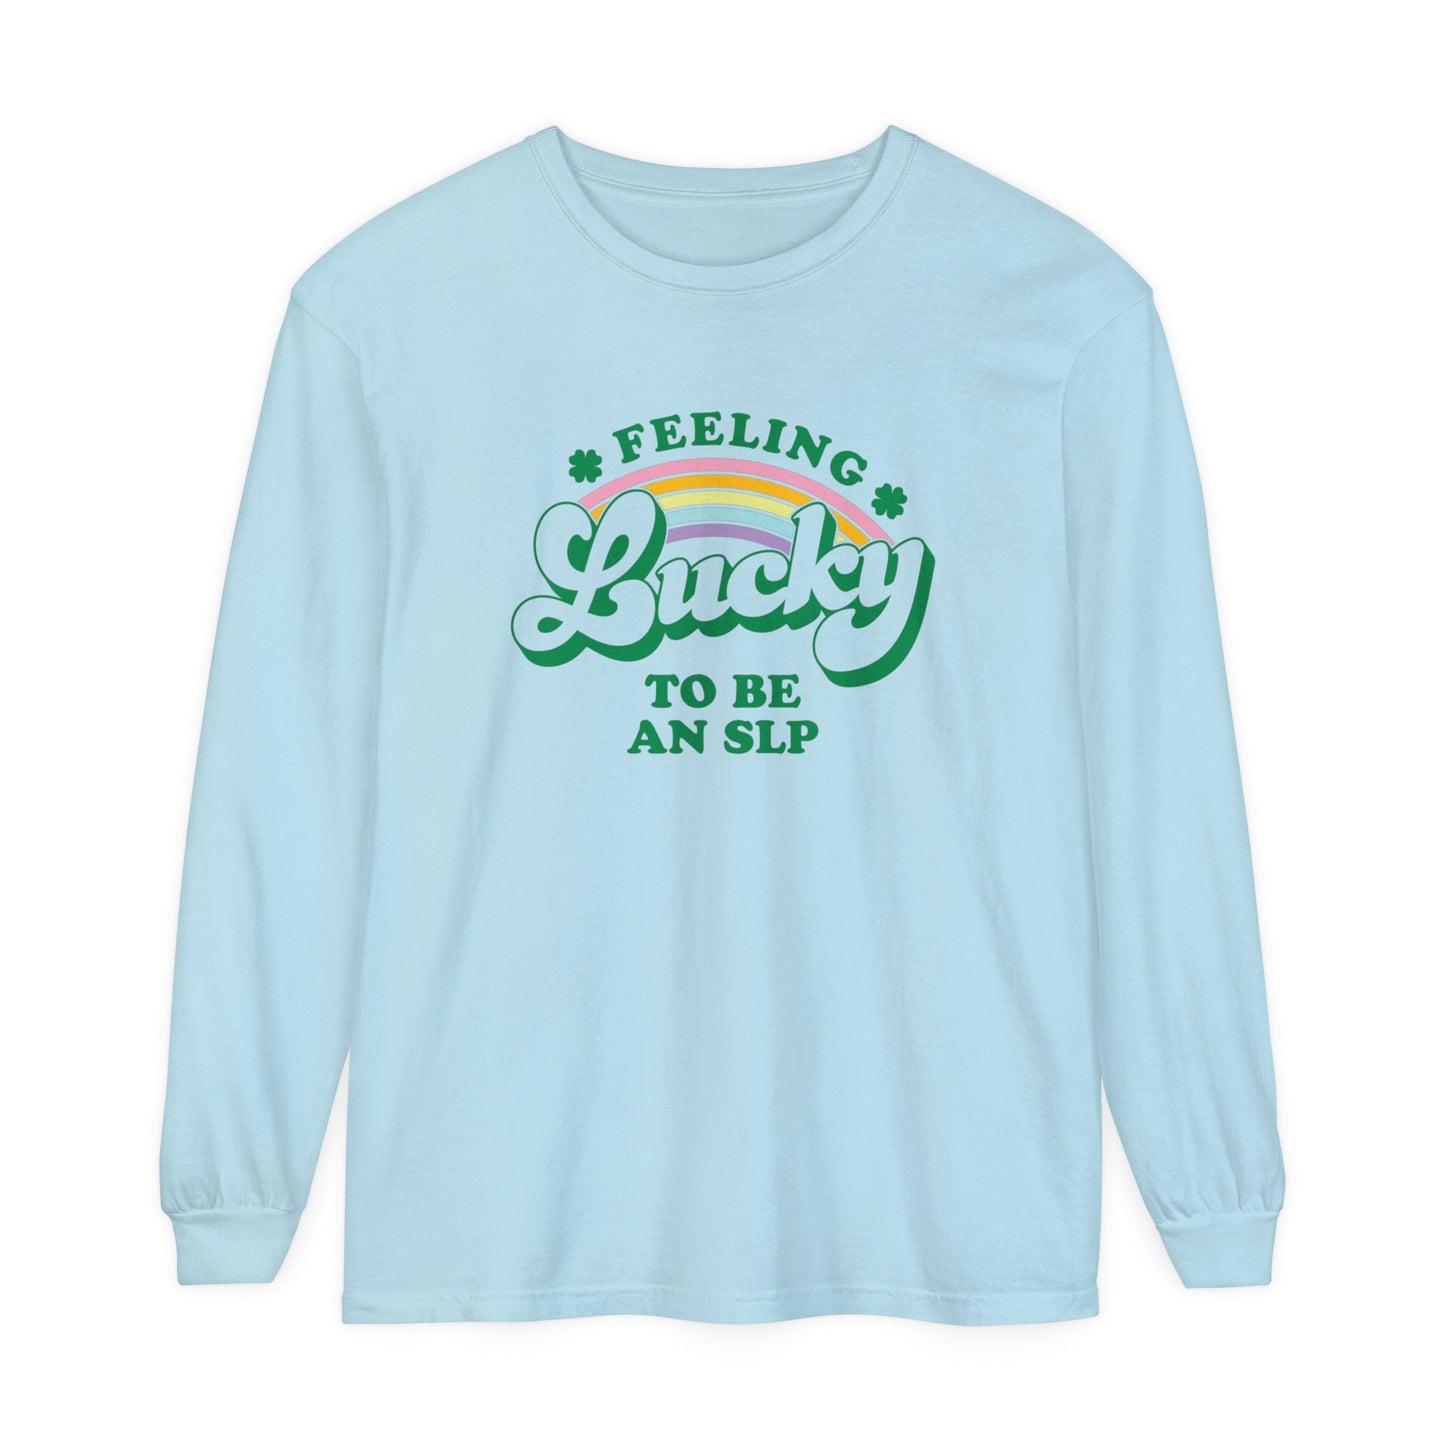 Feeling Lucky to Be an SLP Long Sleeve Comfort Colors T-Shirt